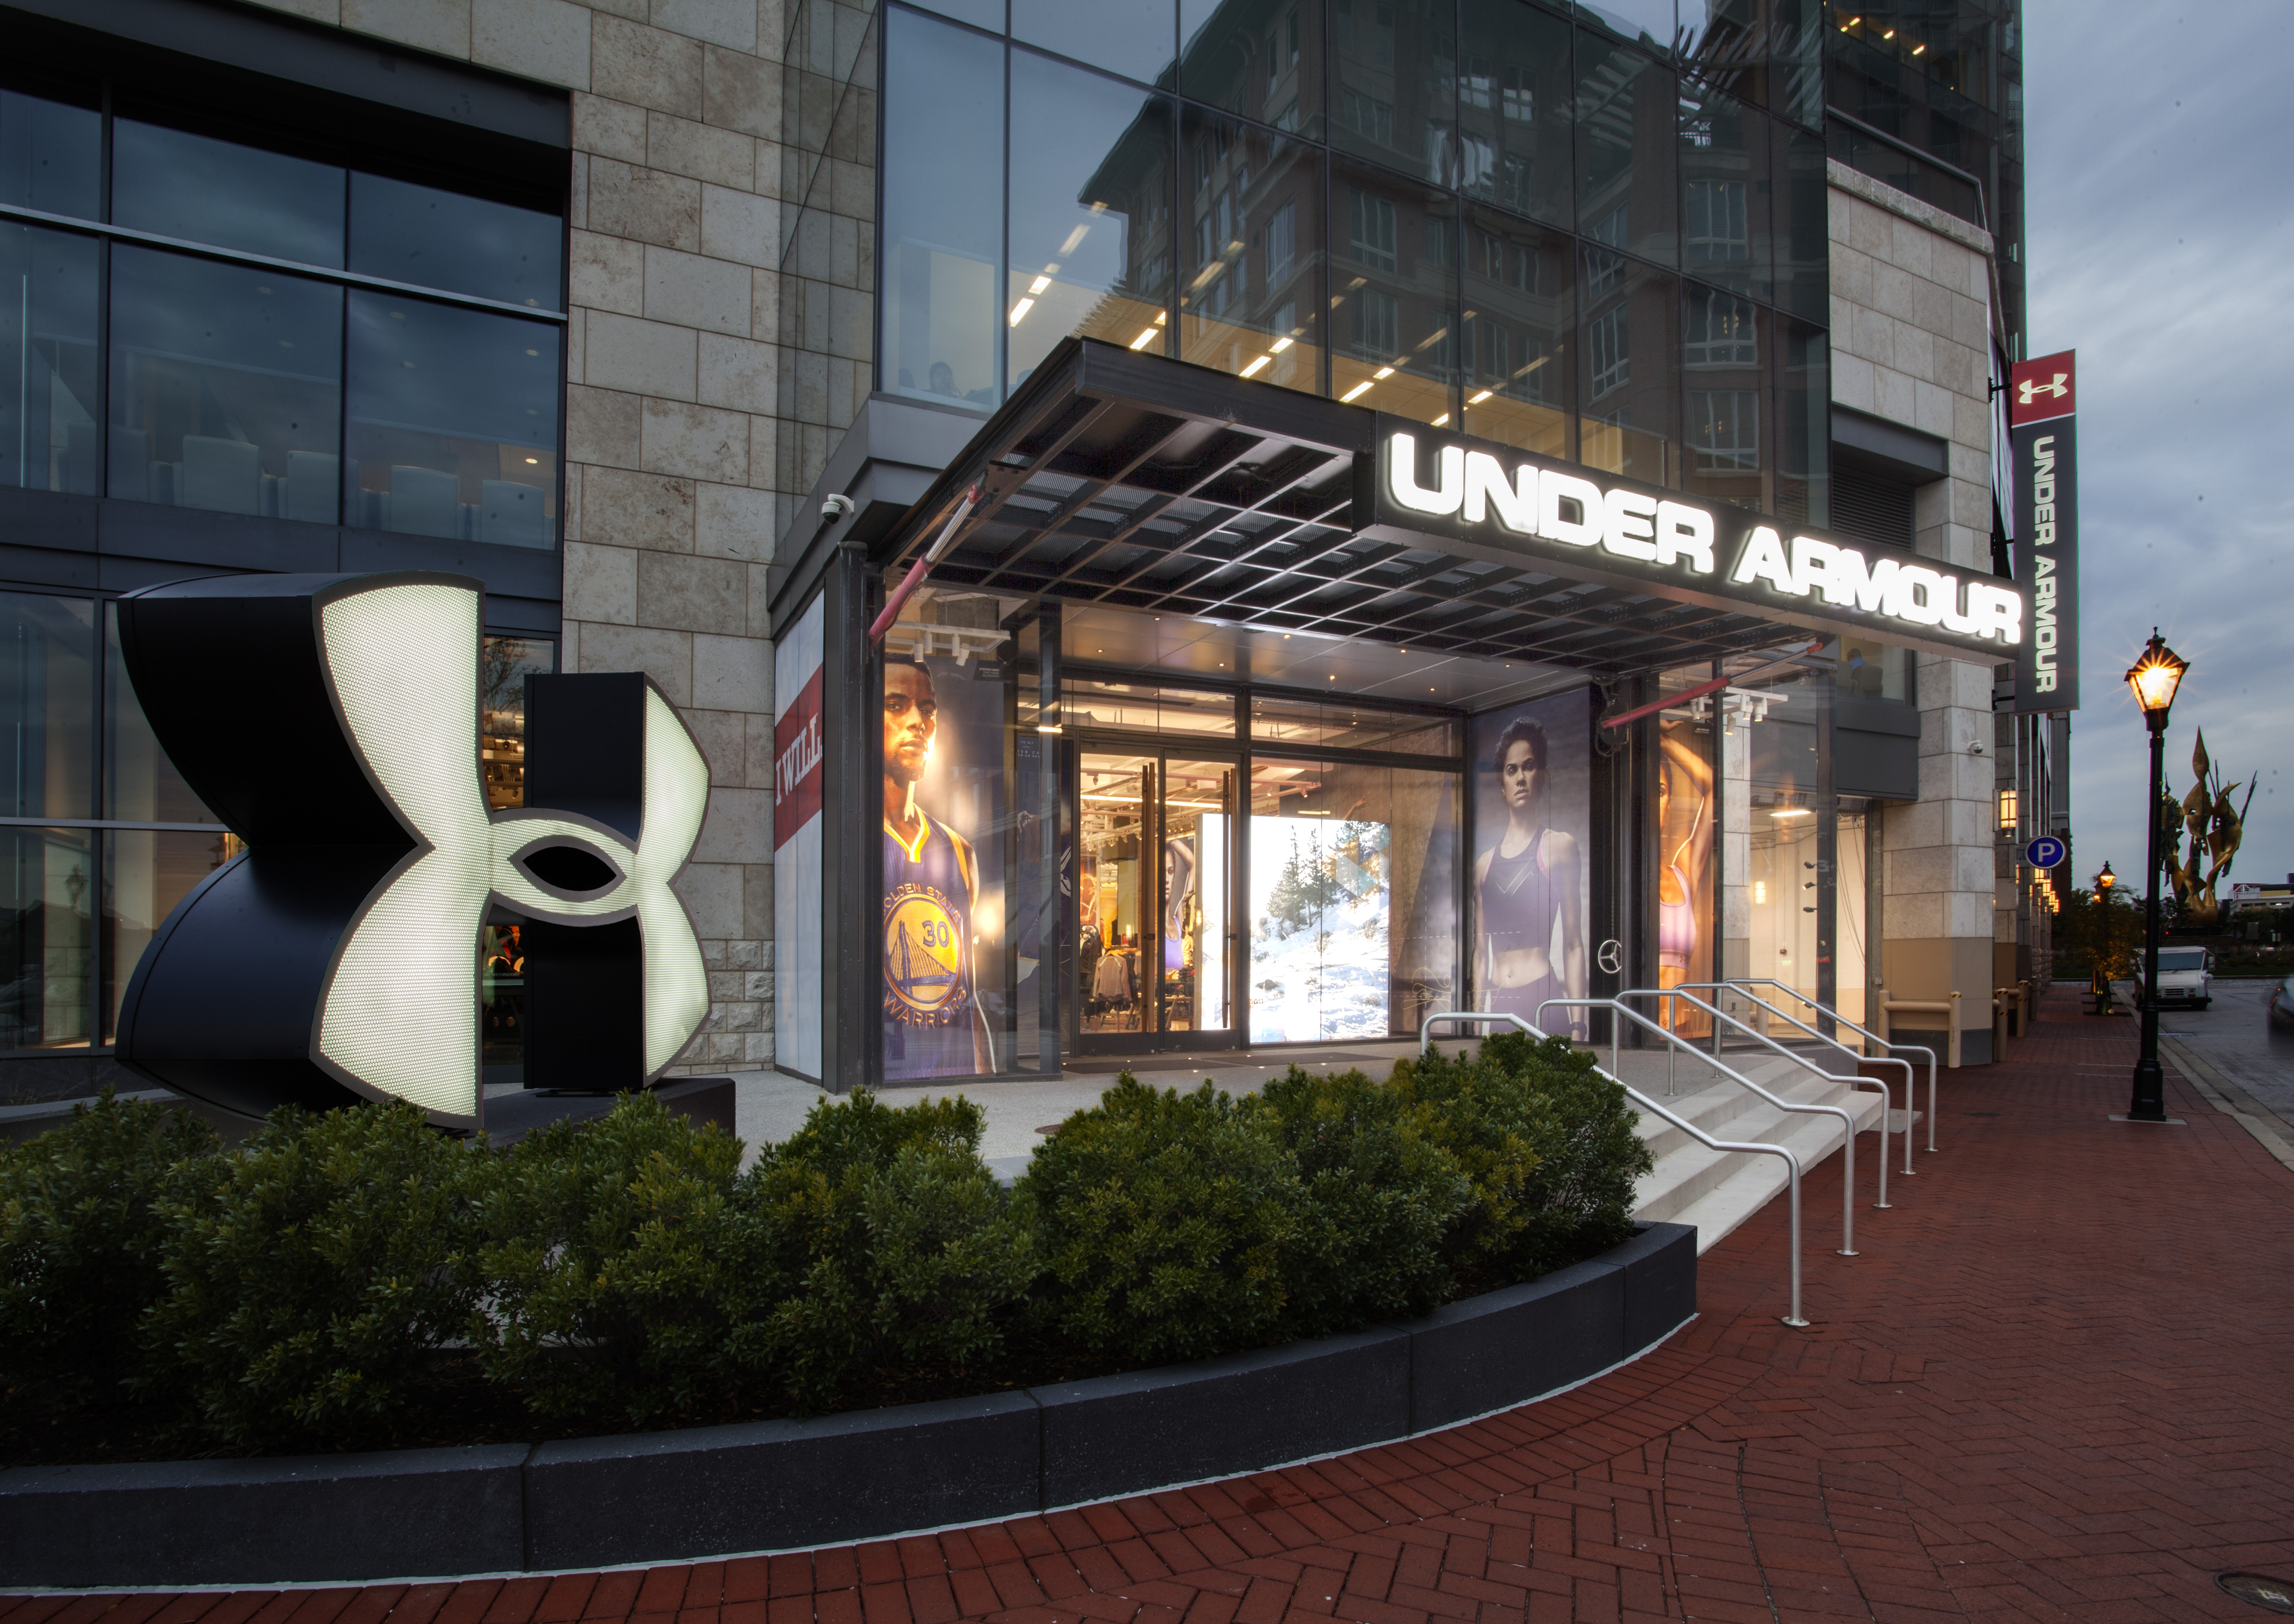 Under Armour - Columbia Brand House